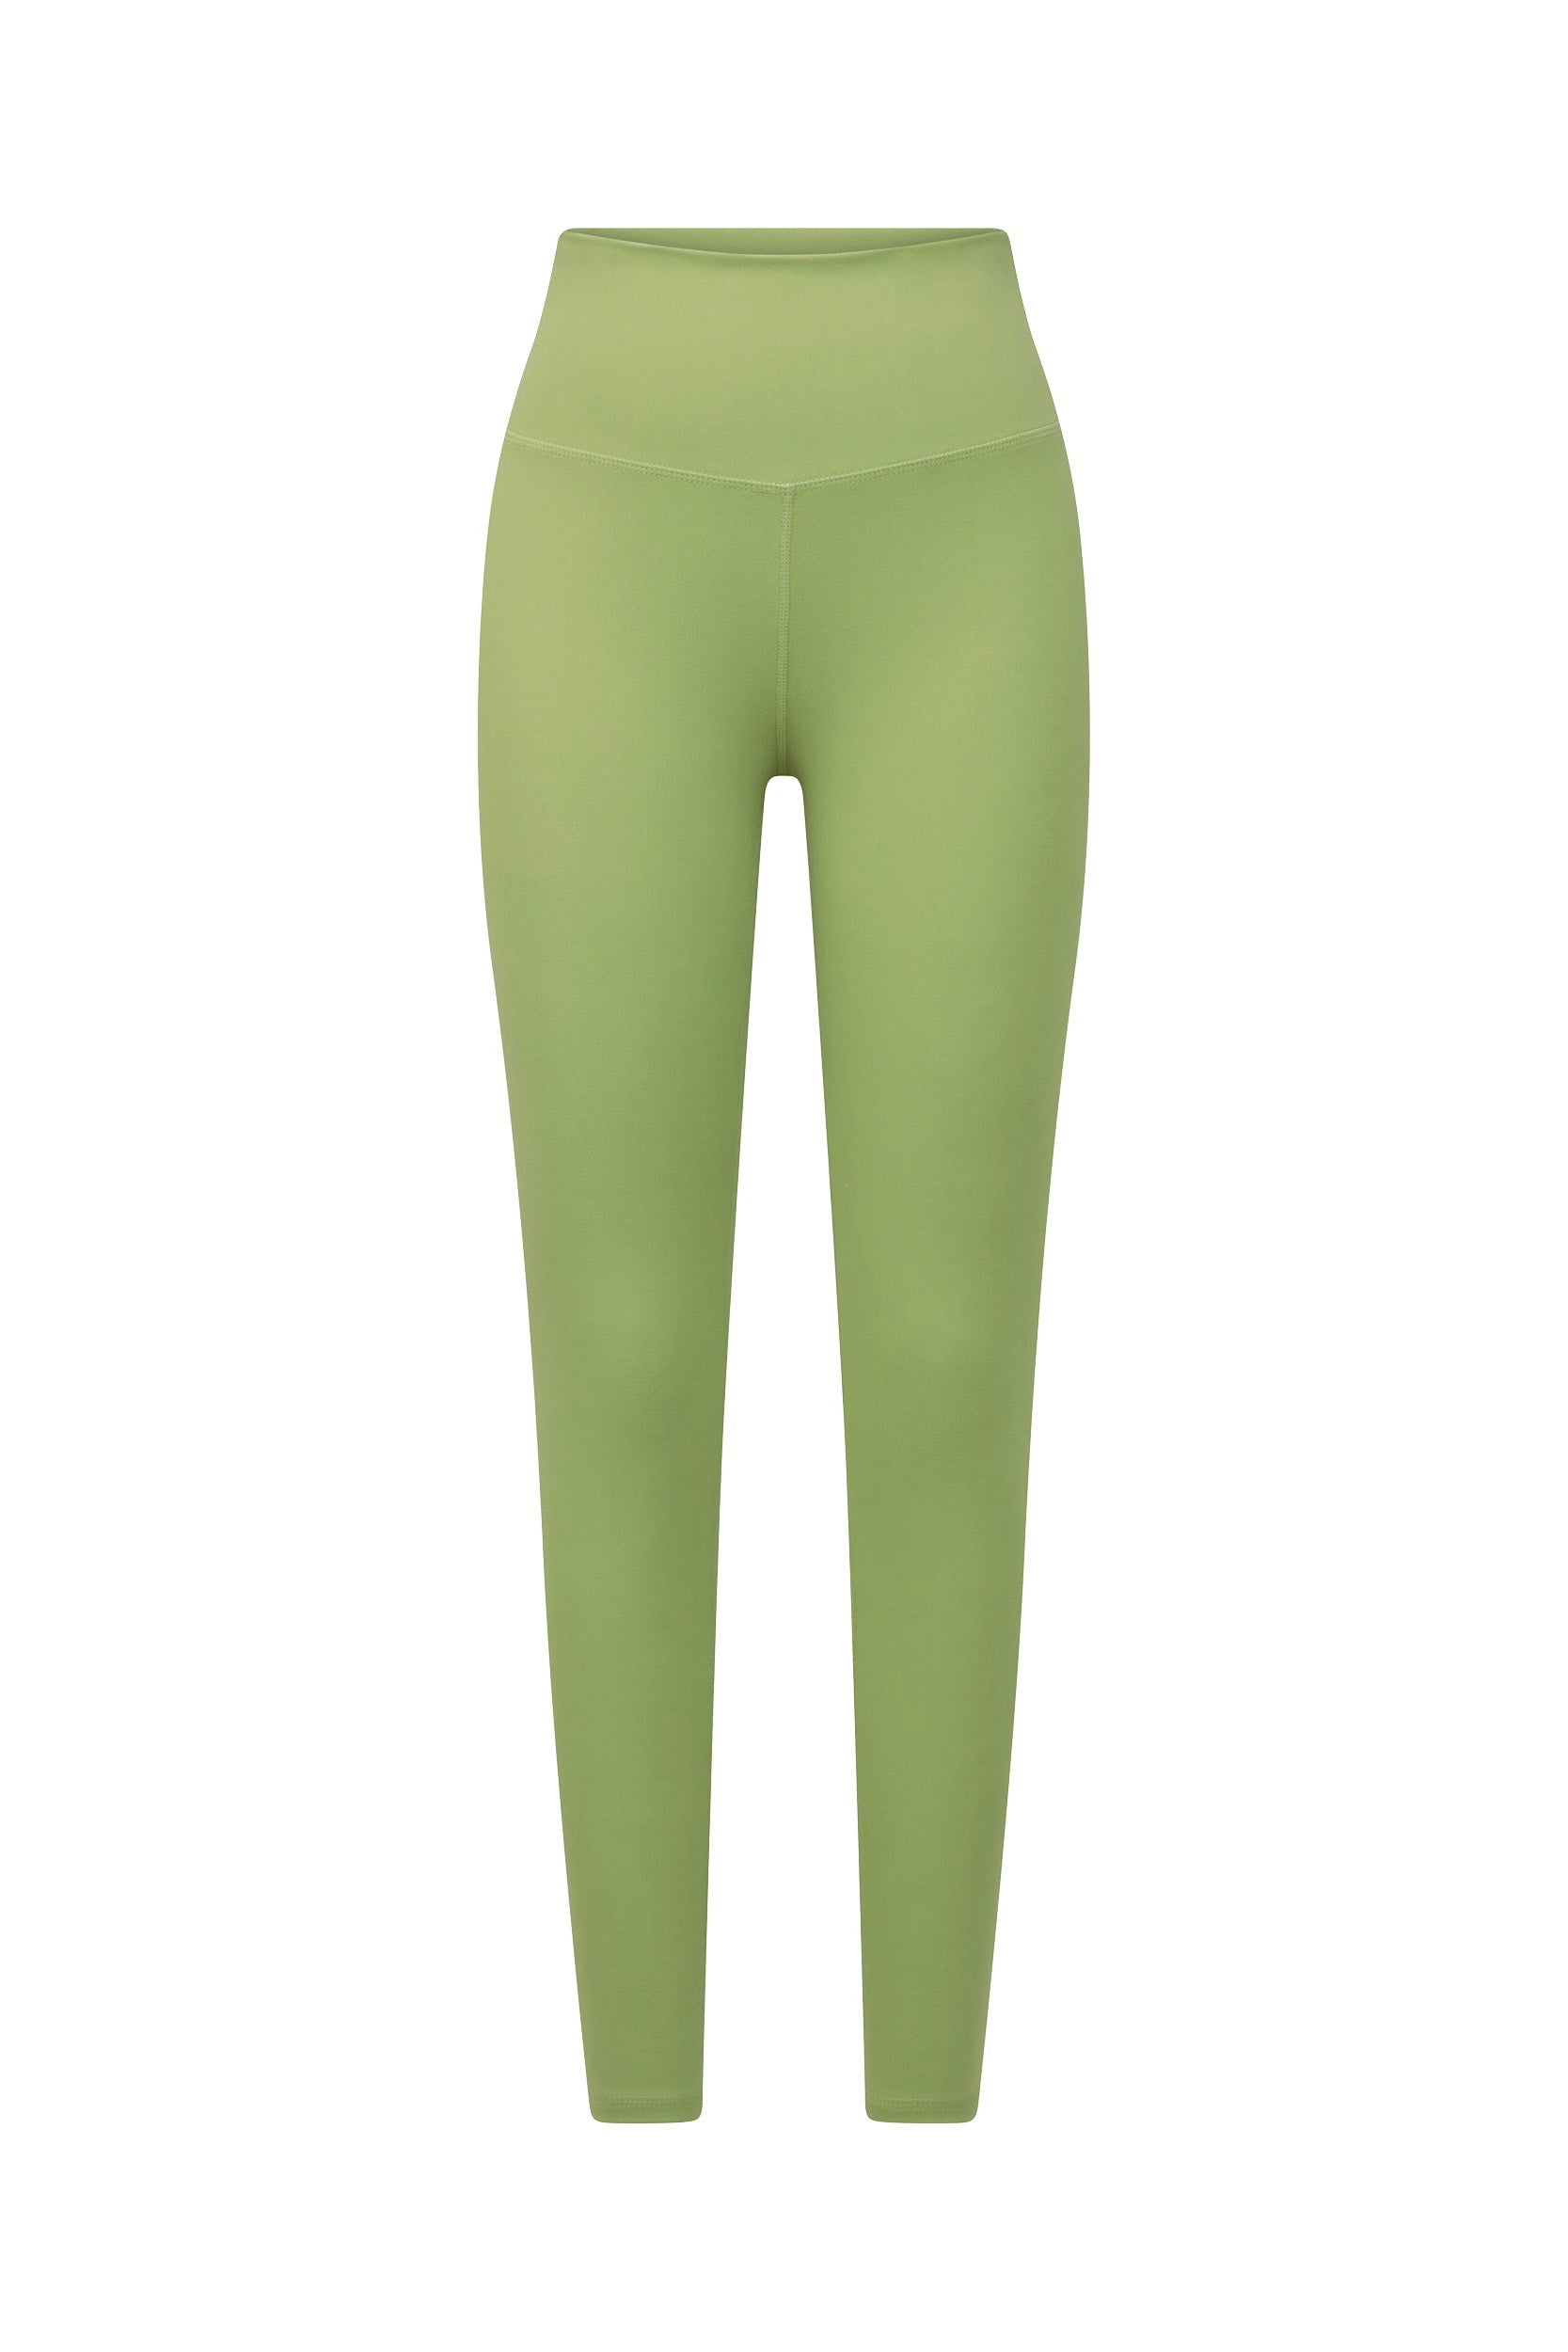 The Limitless Legging - Matcha displayed against a plain white background showcases a pair of high-waisted, full-length green leggings. The sculpting fabric appears smooth and form-fitting. Their simple, unadorned design makes these moisture-wicking leggings suitable for both athletic and casual wear.